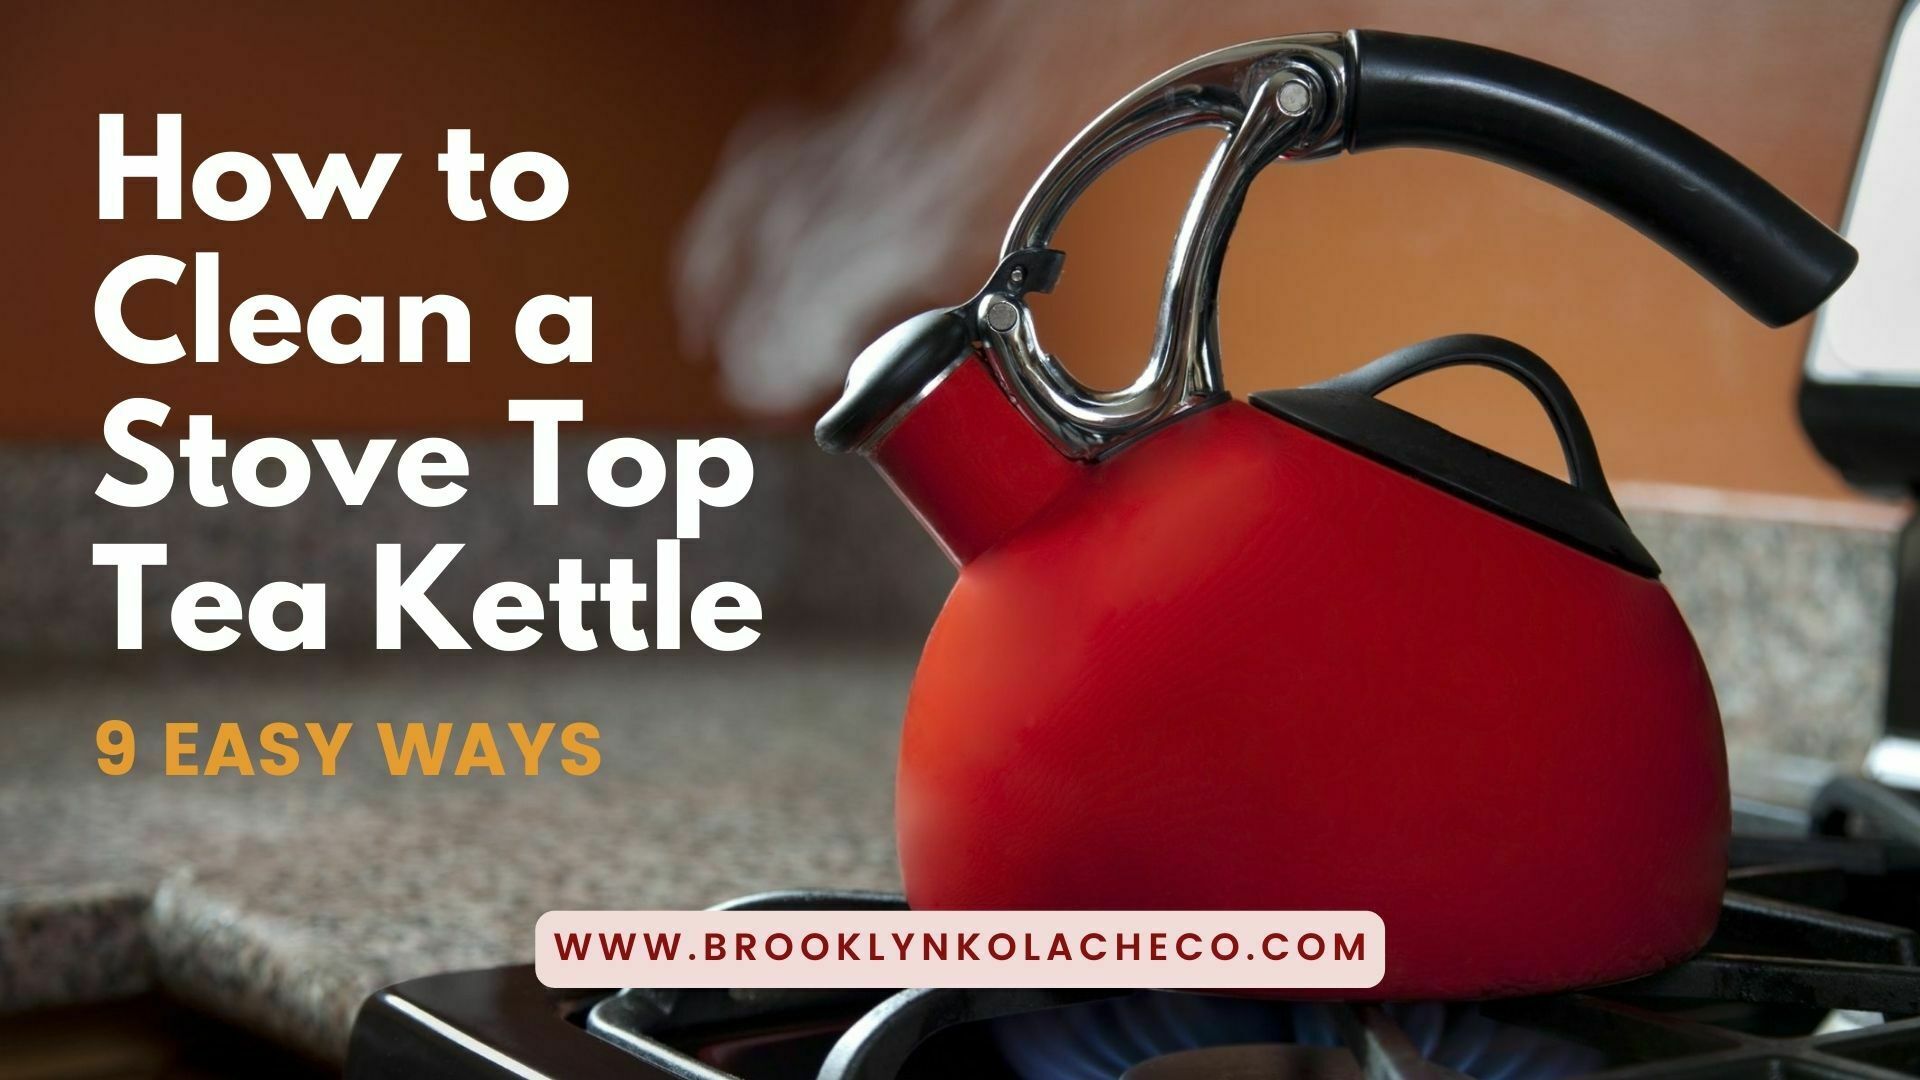 How to Clean a Stove Top Tea Kettle: 9 Easy Ways